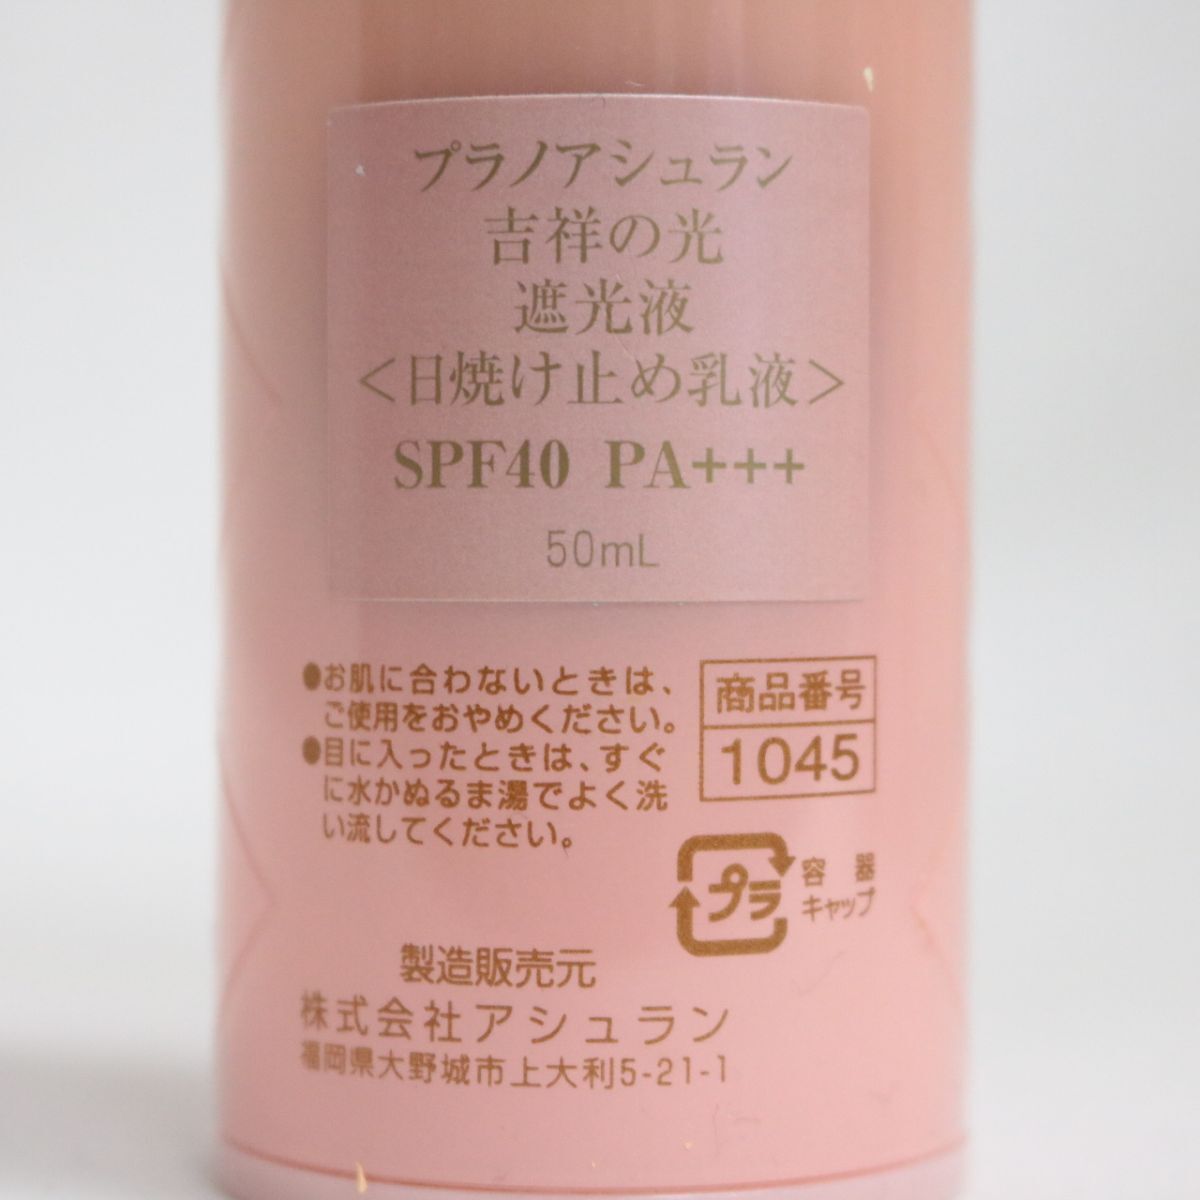 * new goods * outer box * exclusive use pump attached none ashu lamp la Noah shu Ran ... light shade fluid sunscreen milky lotion SPF40 50mL ( 1227-n2 )